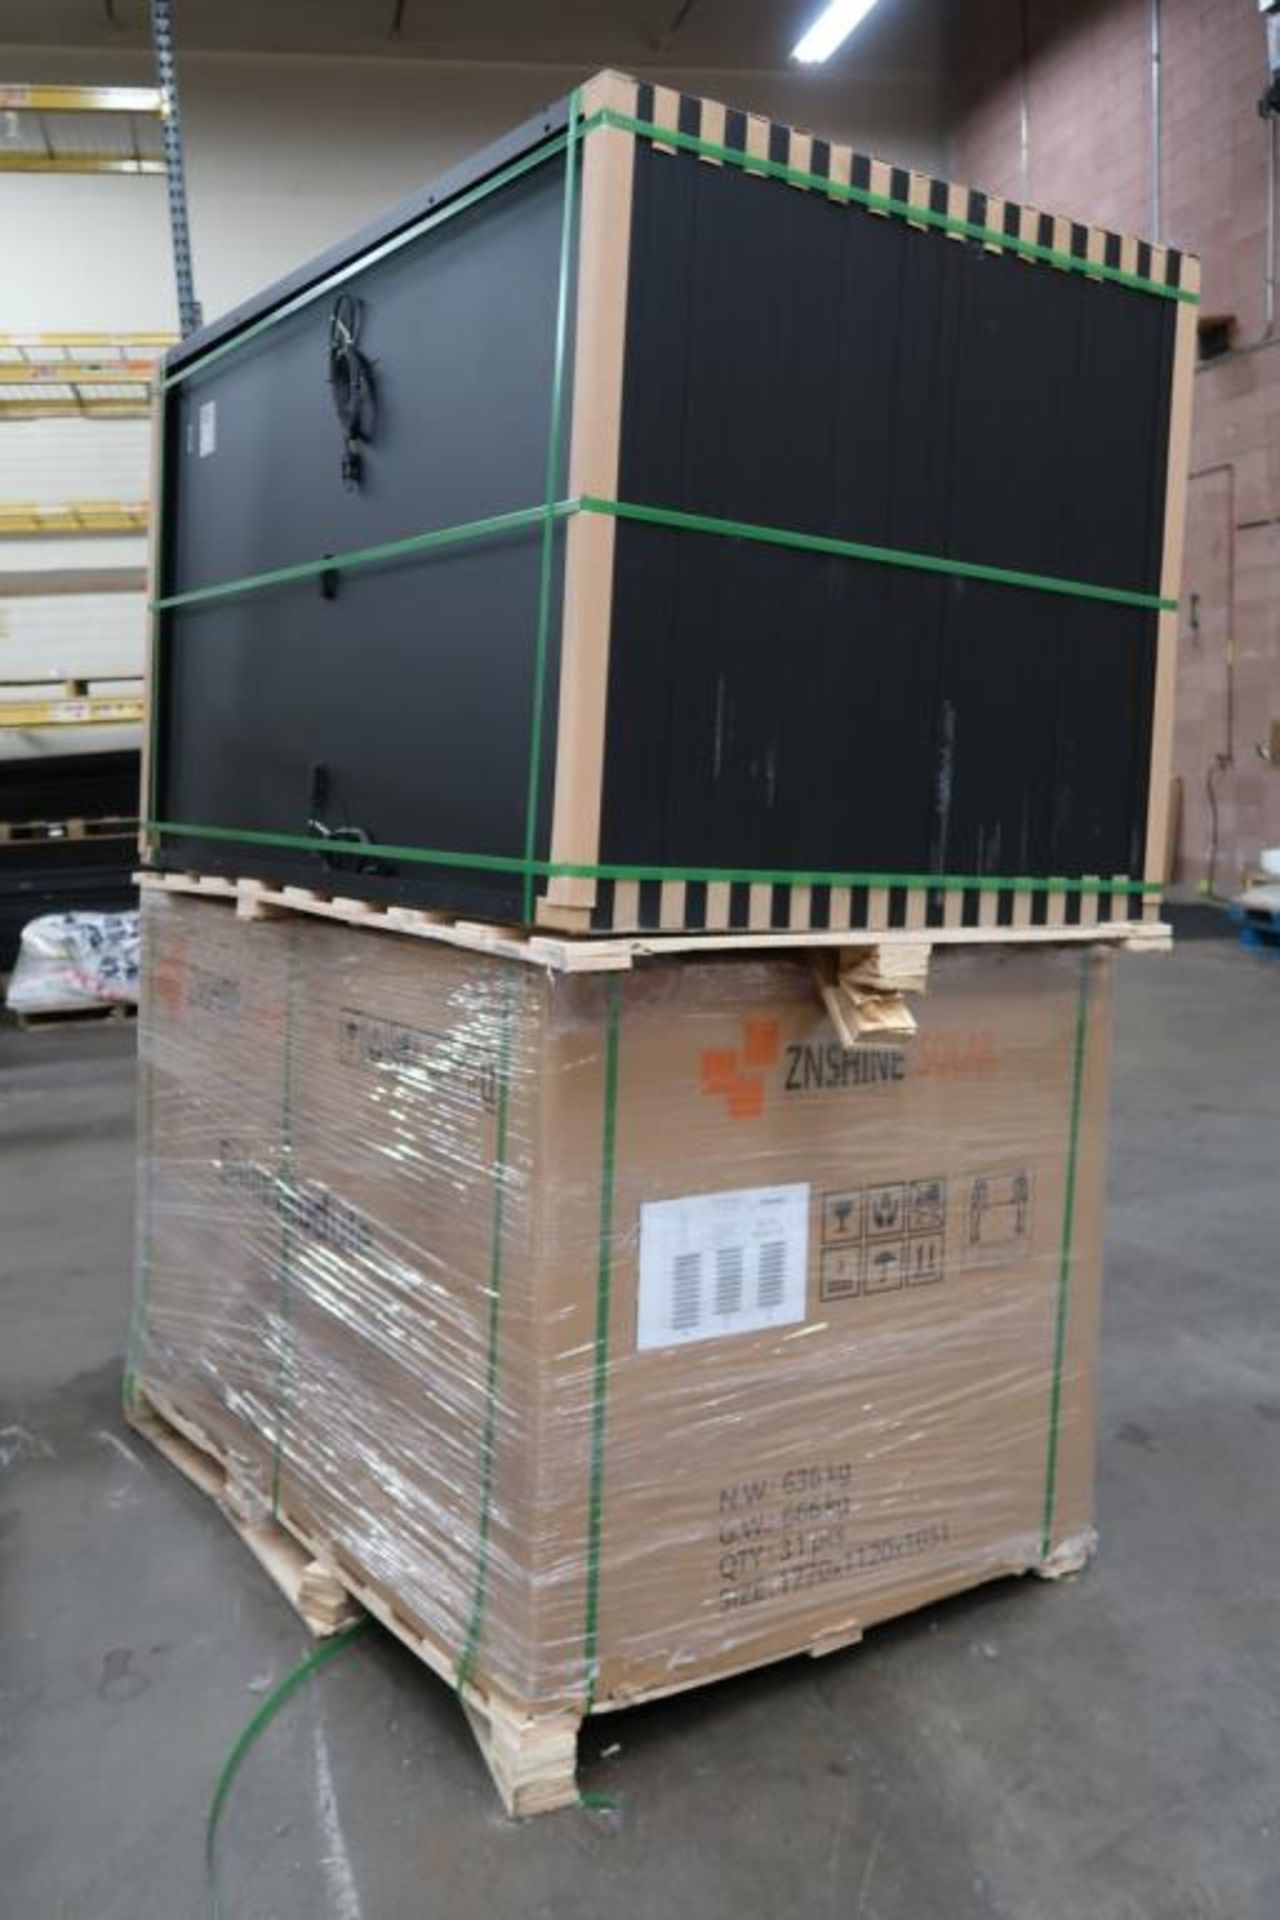 ZNSHINE Pallets of 370W Photovoltaic Solar Panels - Image 2 of 4